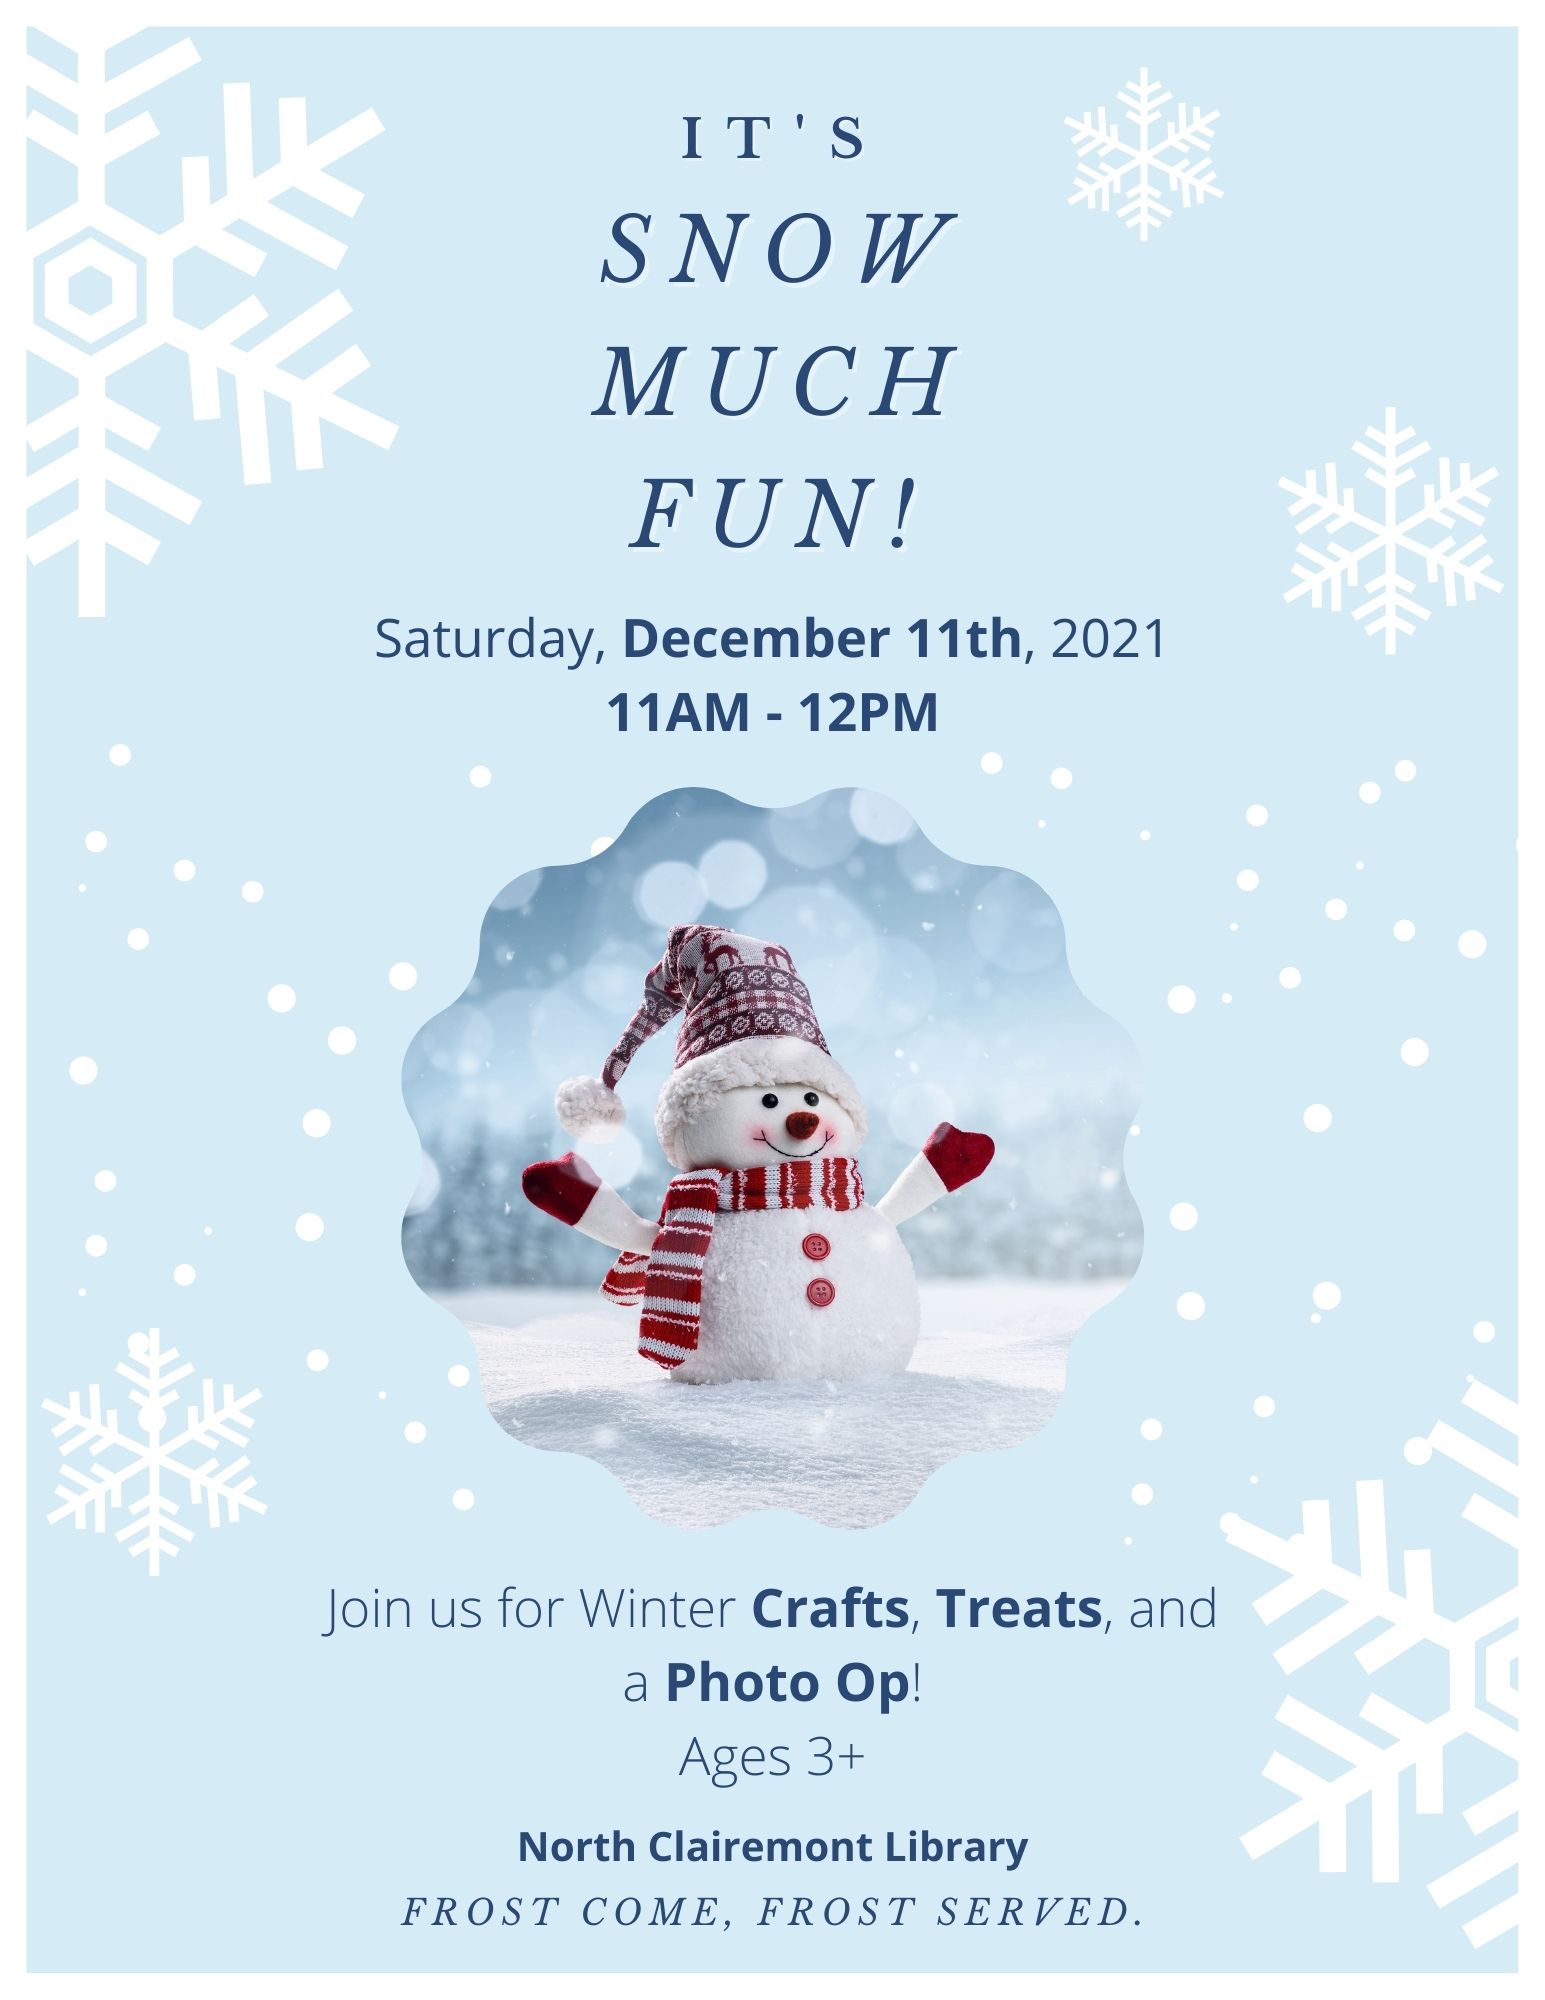 Join us for this special event.  Crafts, sweets, & photo ops!